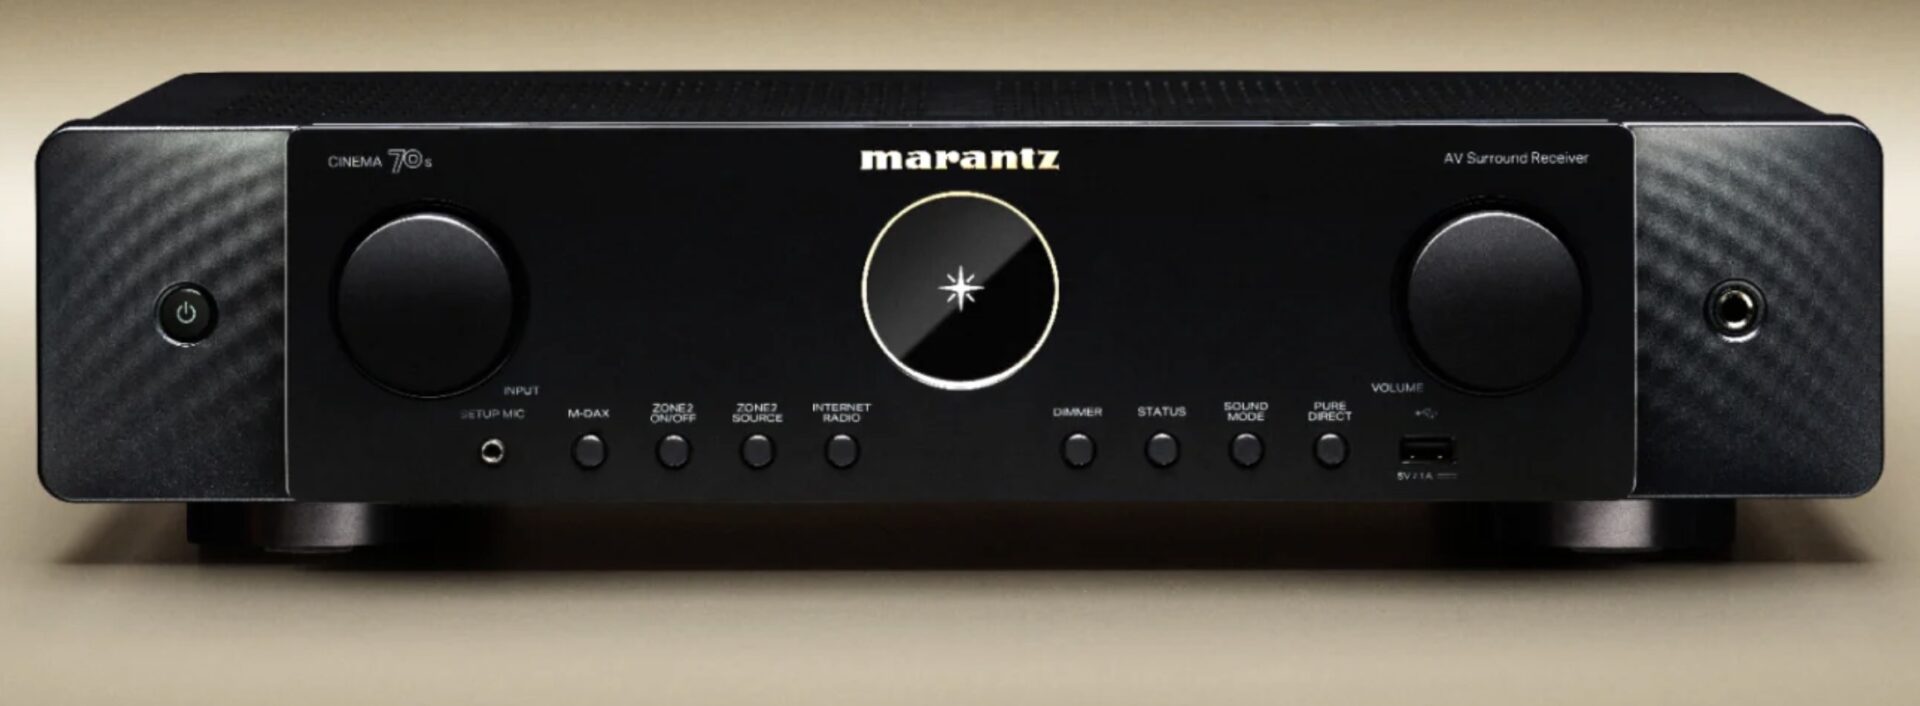 JUST RELEASED! Marantz Stereo 70s 2 Channel A/V Receiver - Classic